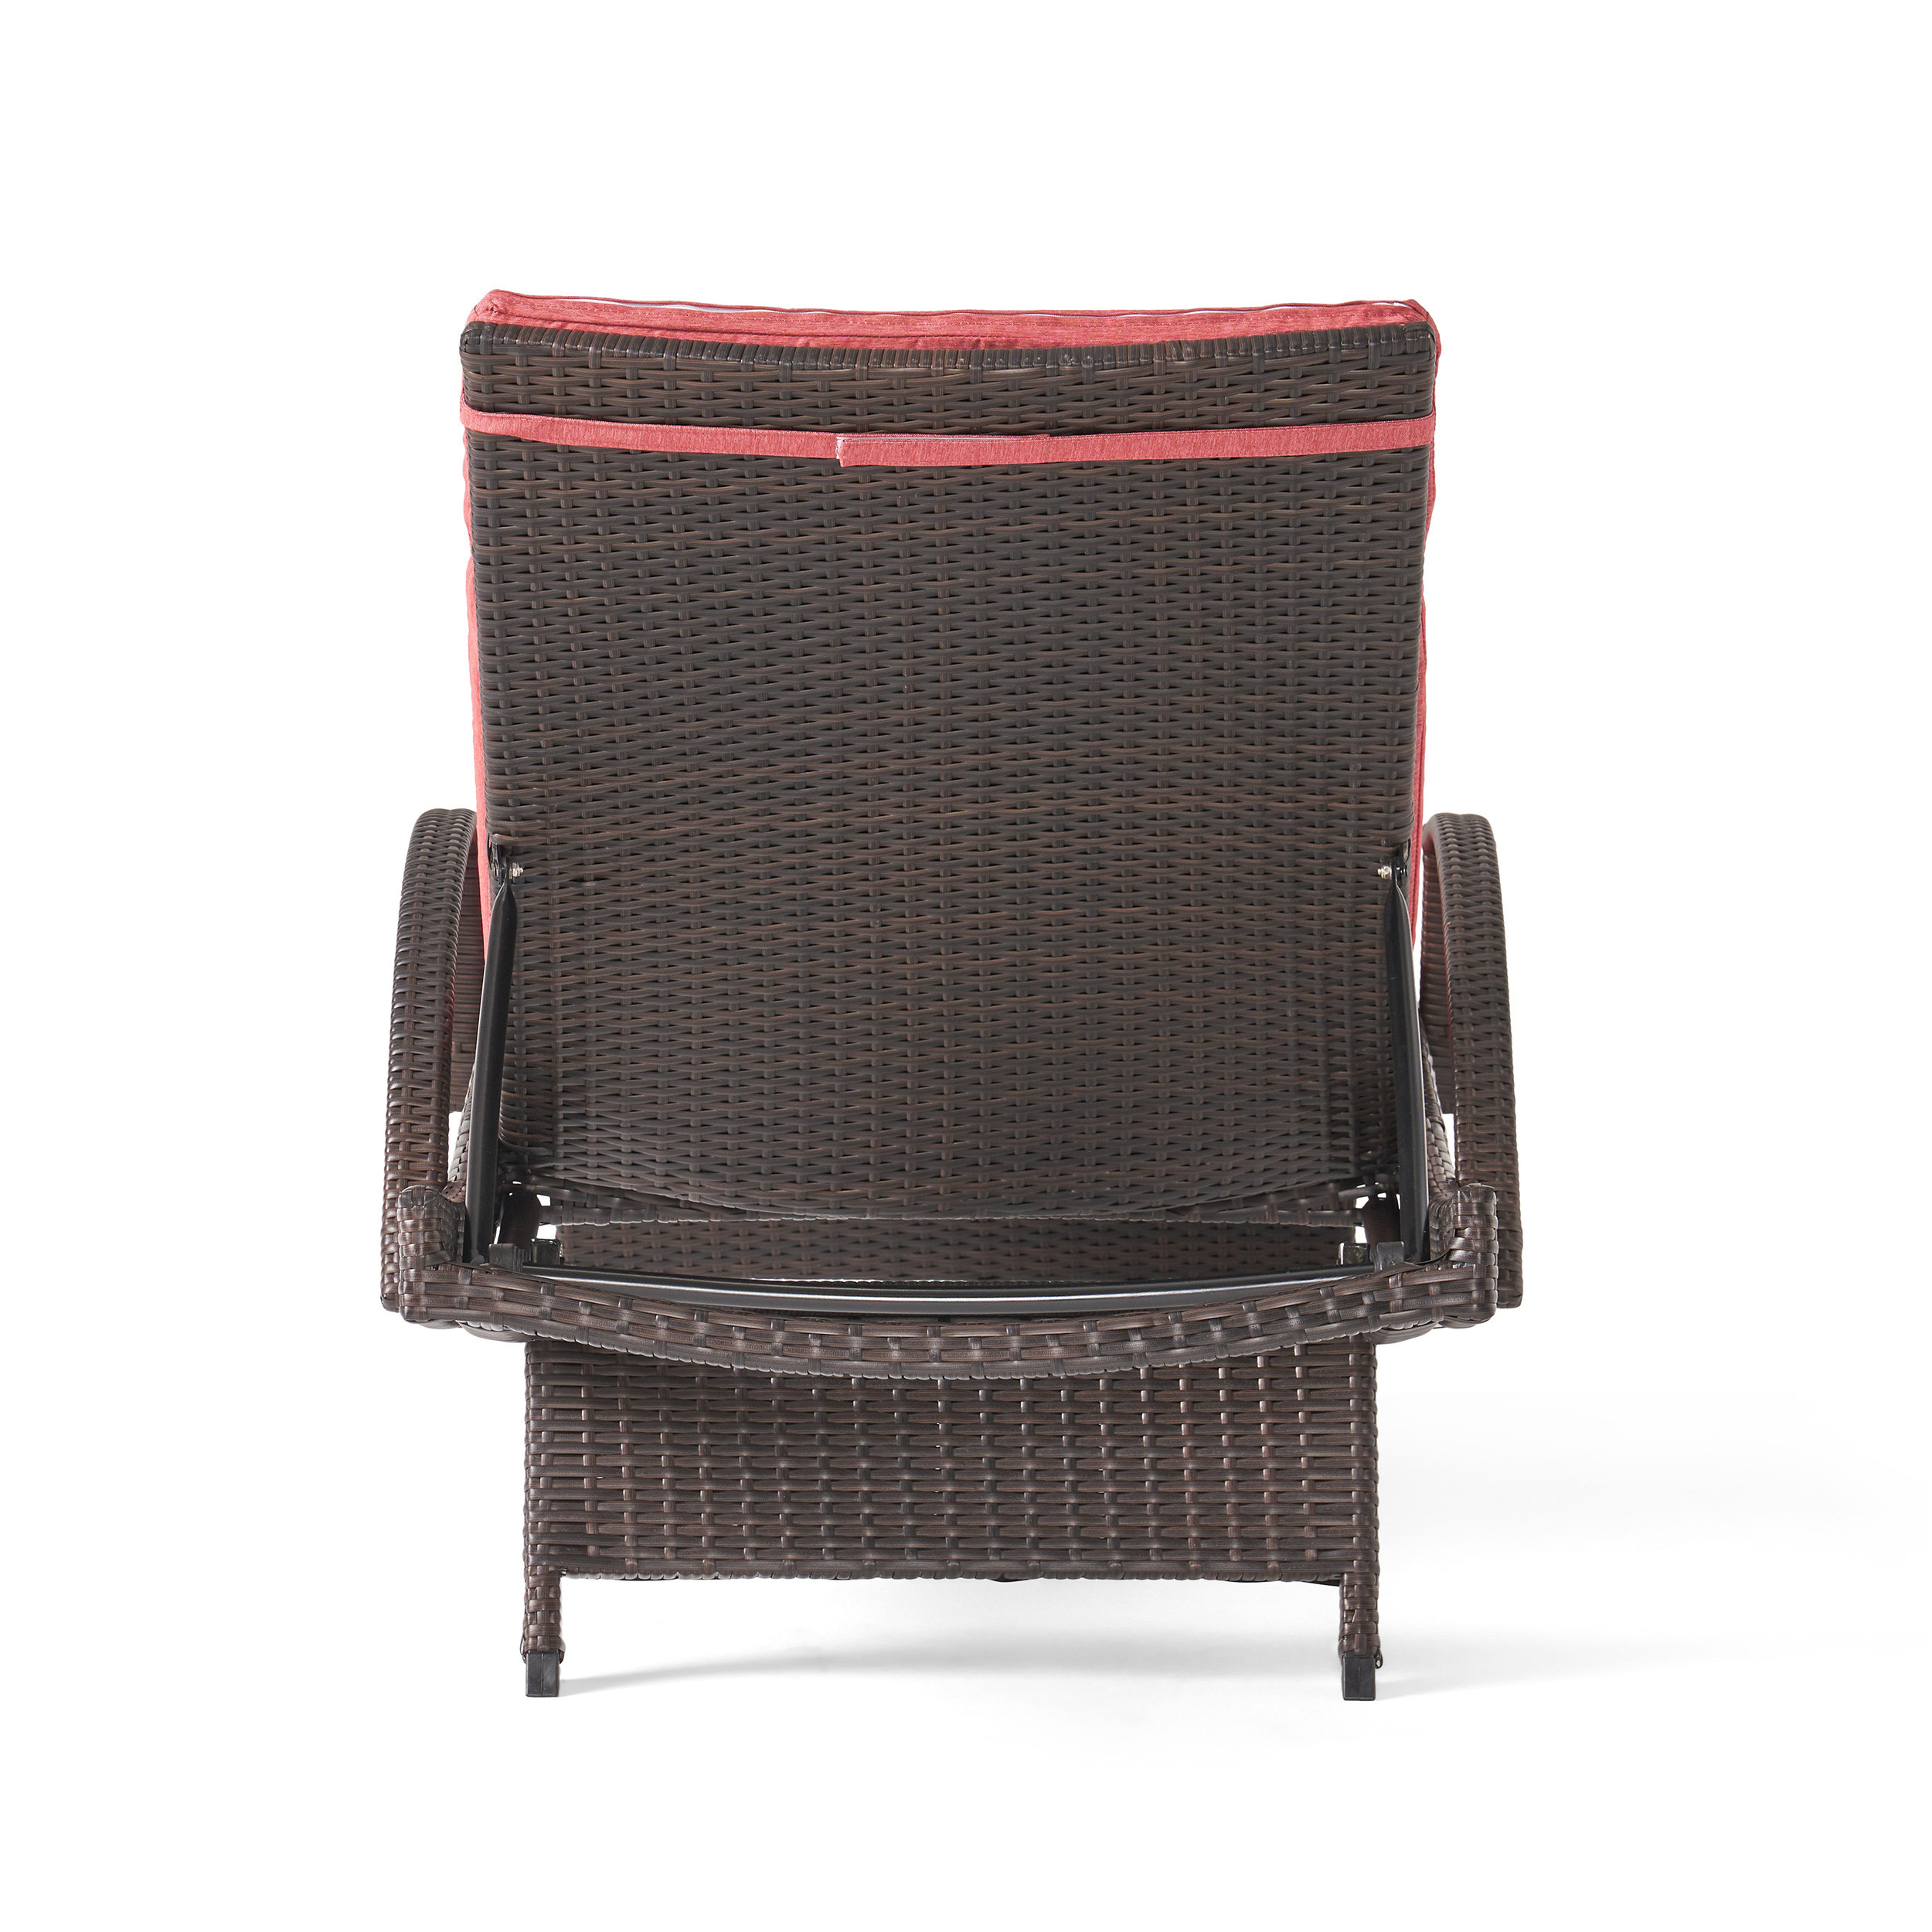 GDF Studio Olivia Outdoor Wicker Adjustable Chaise Lounge with Cushion, Multibrown and Red - image 2 of 8